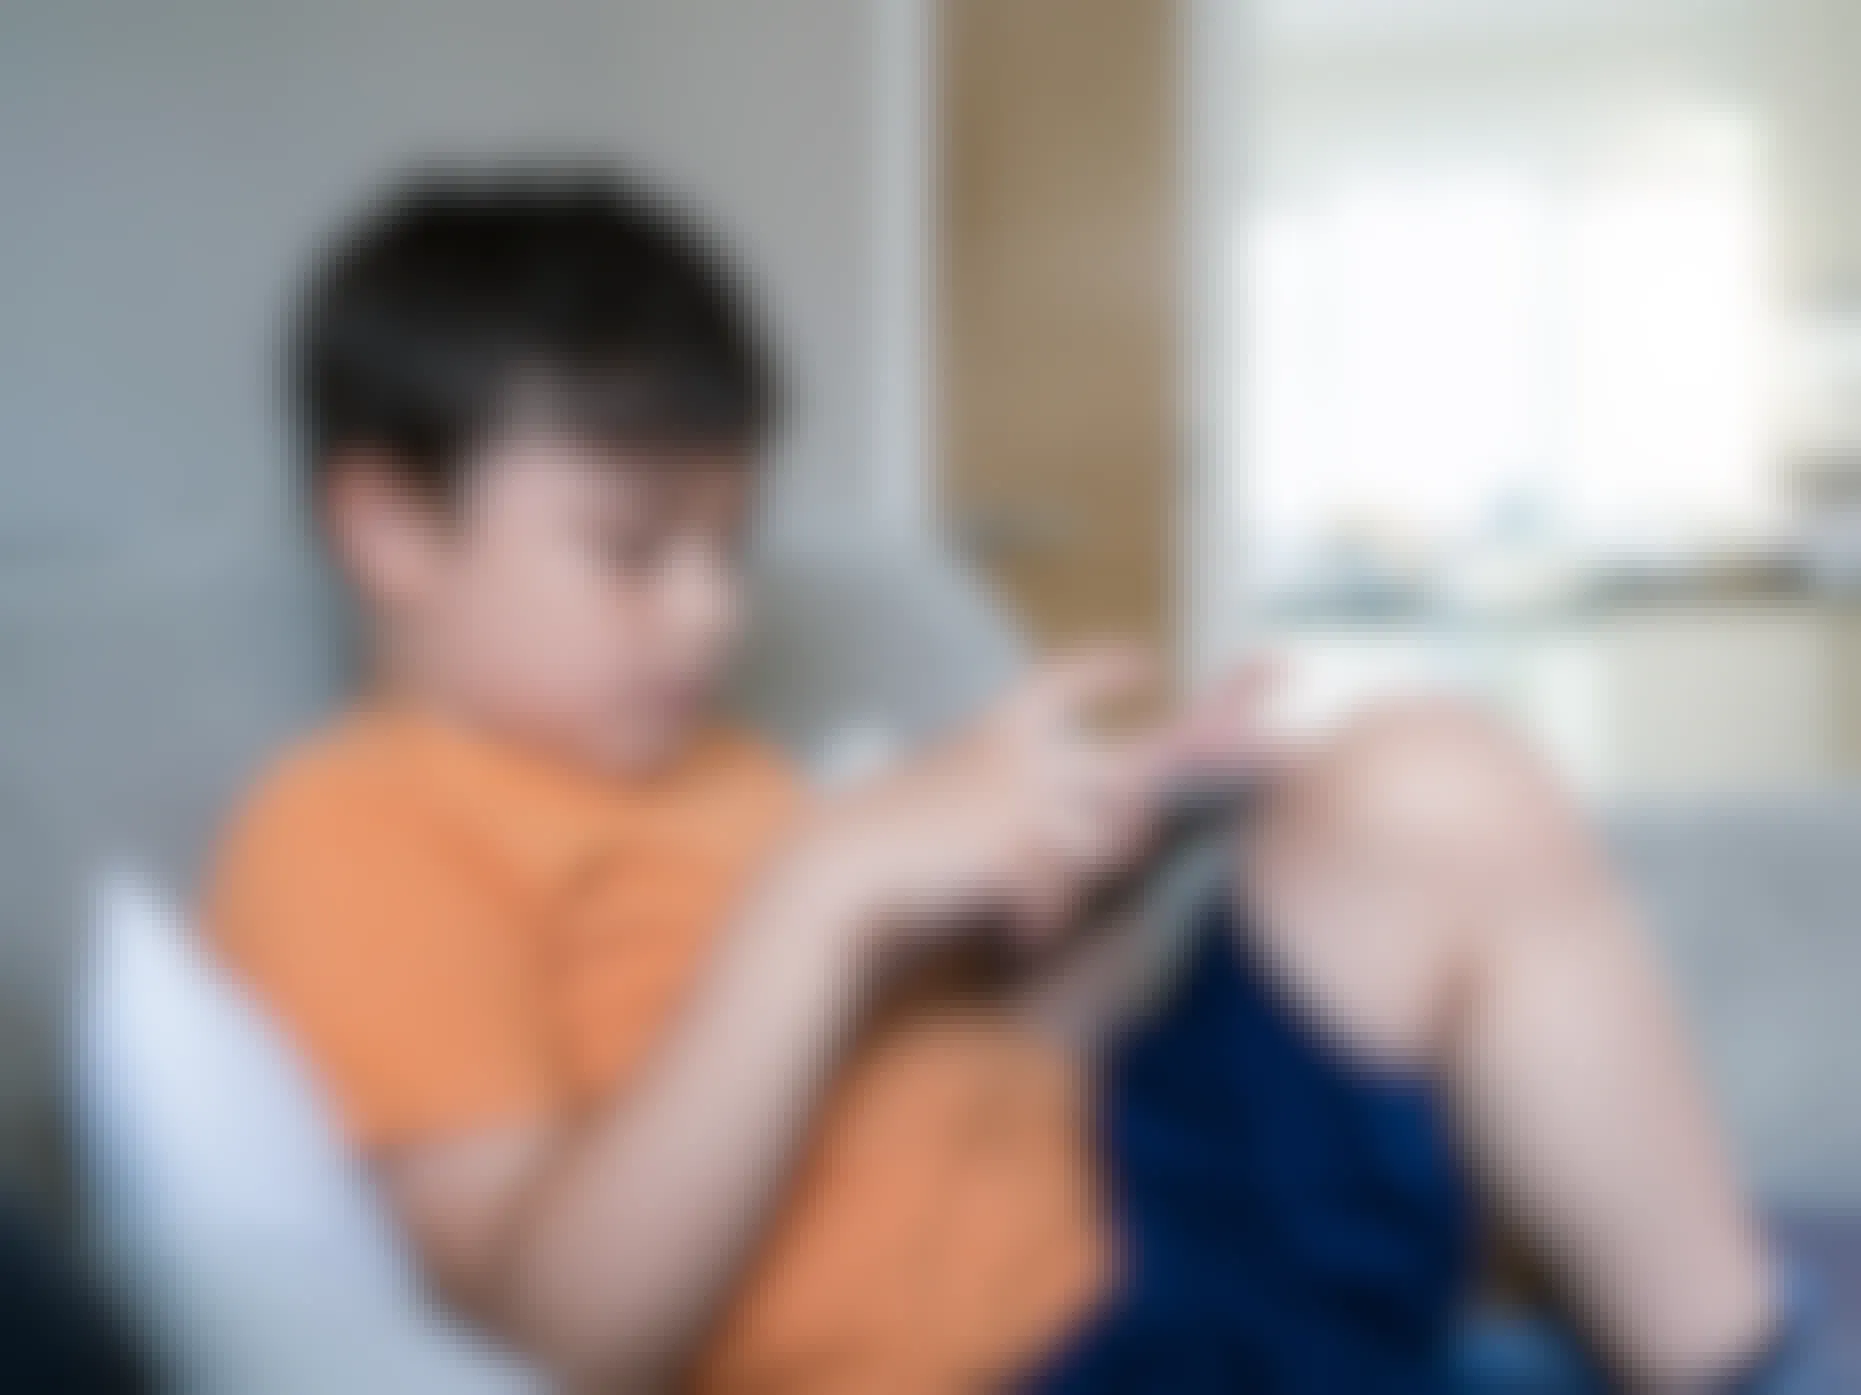 A child sitting on a couch, holding and looking down at an e-reading device.